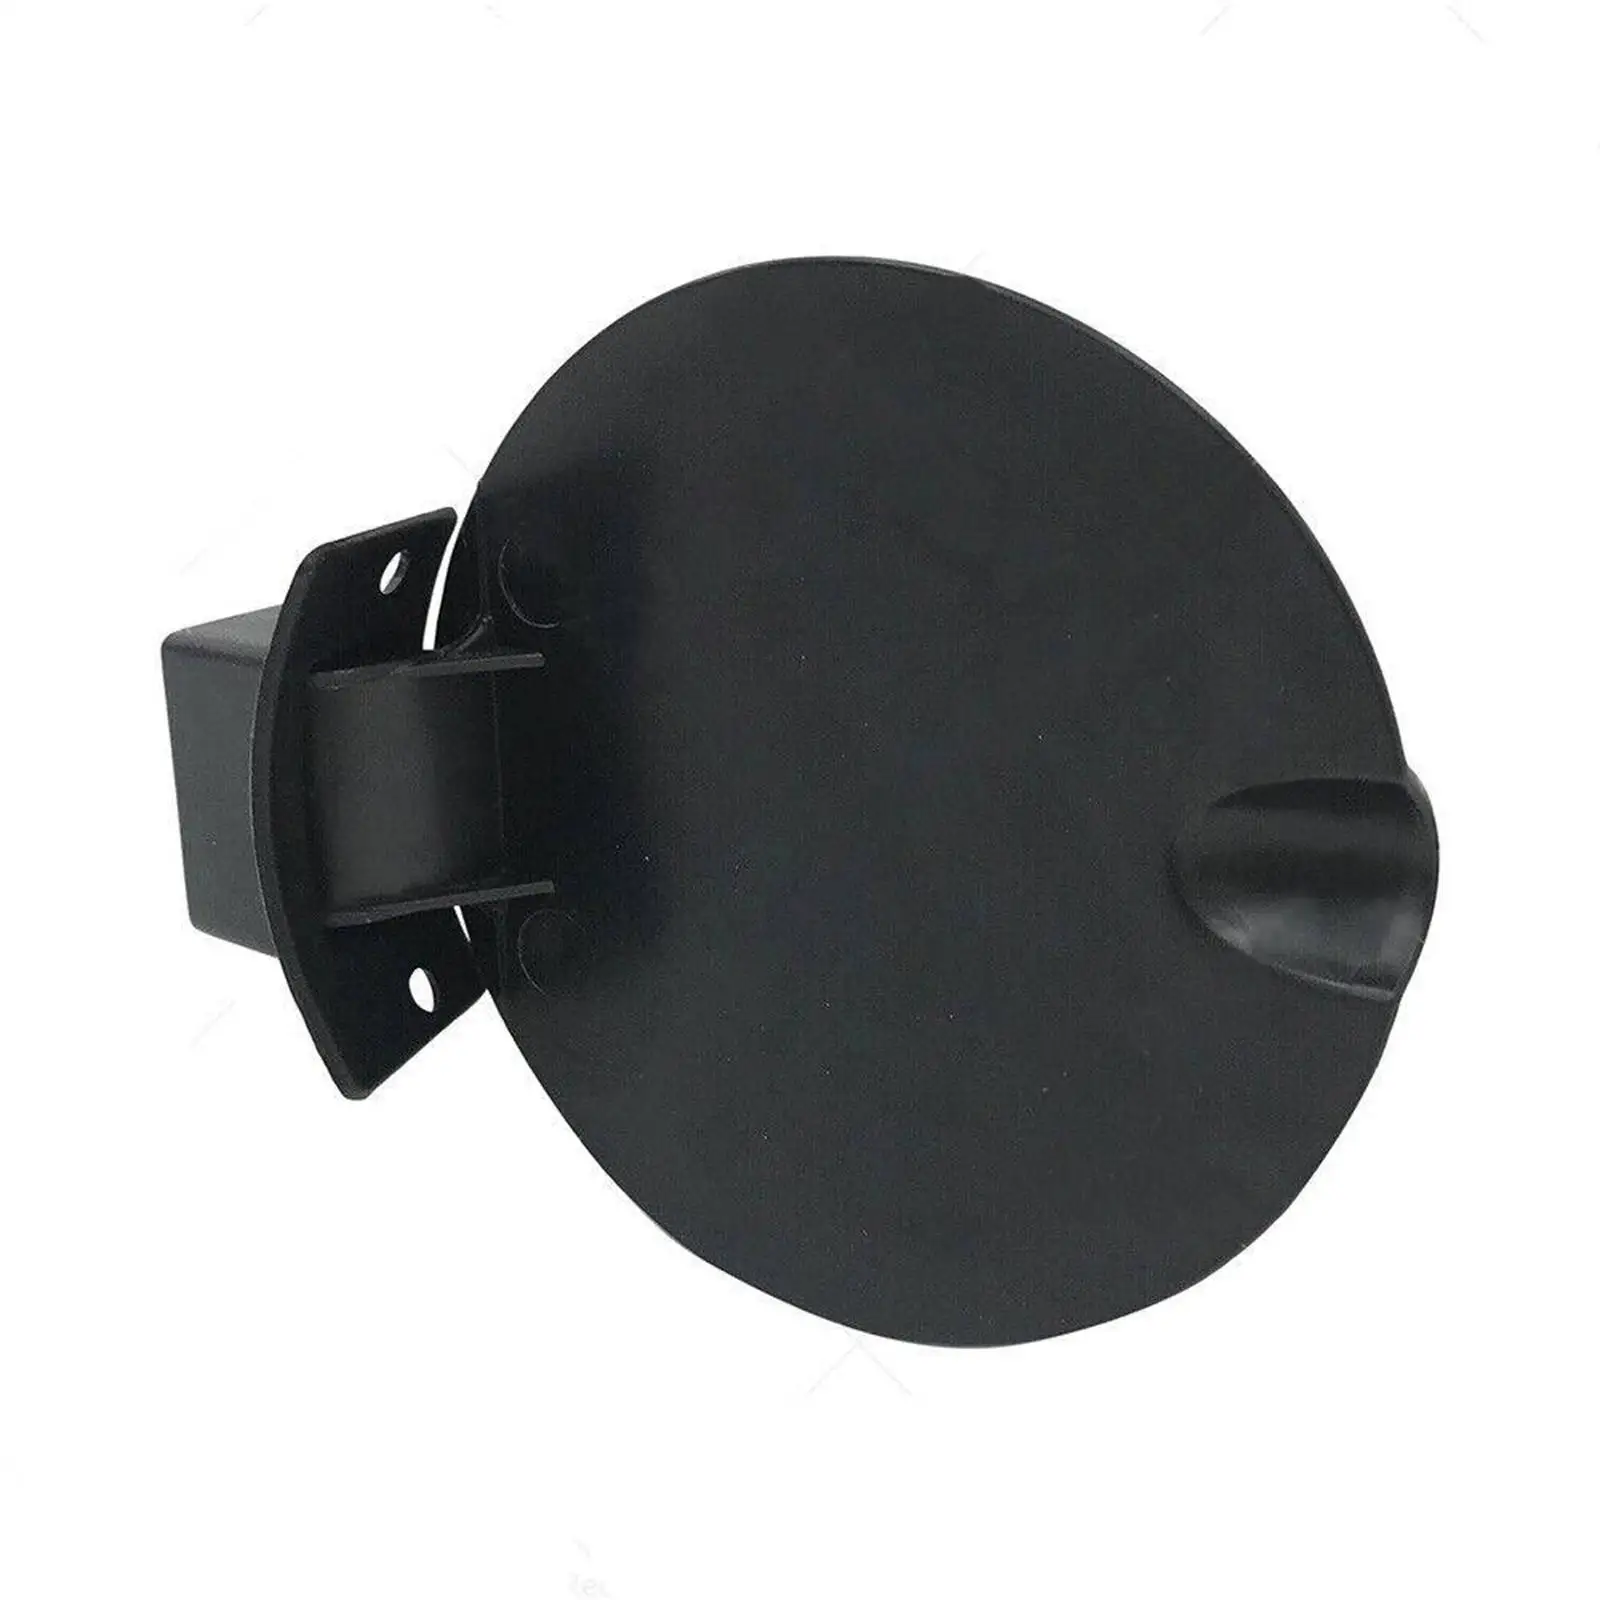 Fuel Flap Fuel Tank Cap Assembly Fuel Filler Flap Cover Lid for Holden VU Vy Vz Commodore 2000 to 2007 Durable